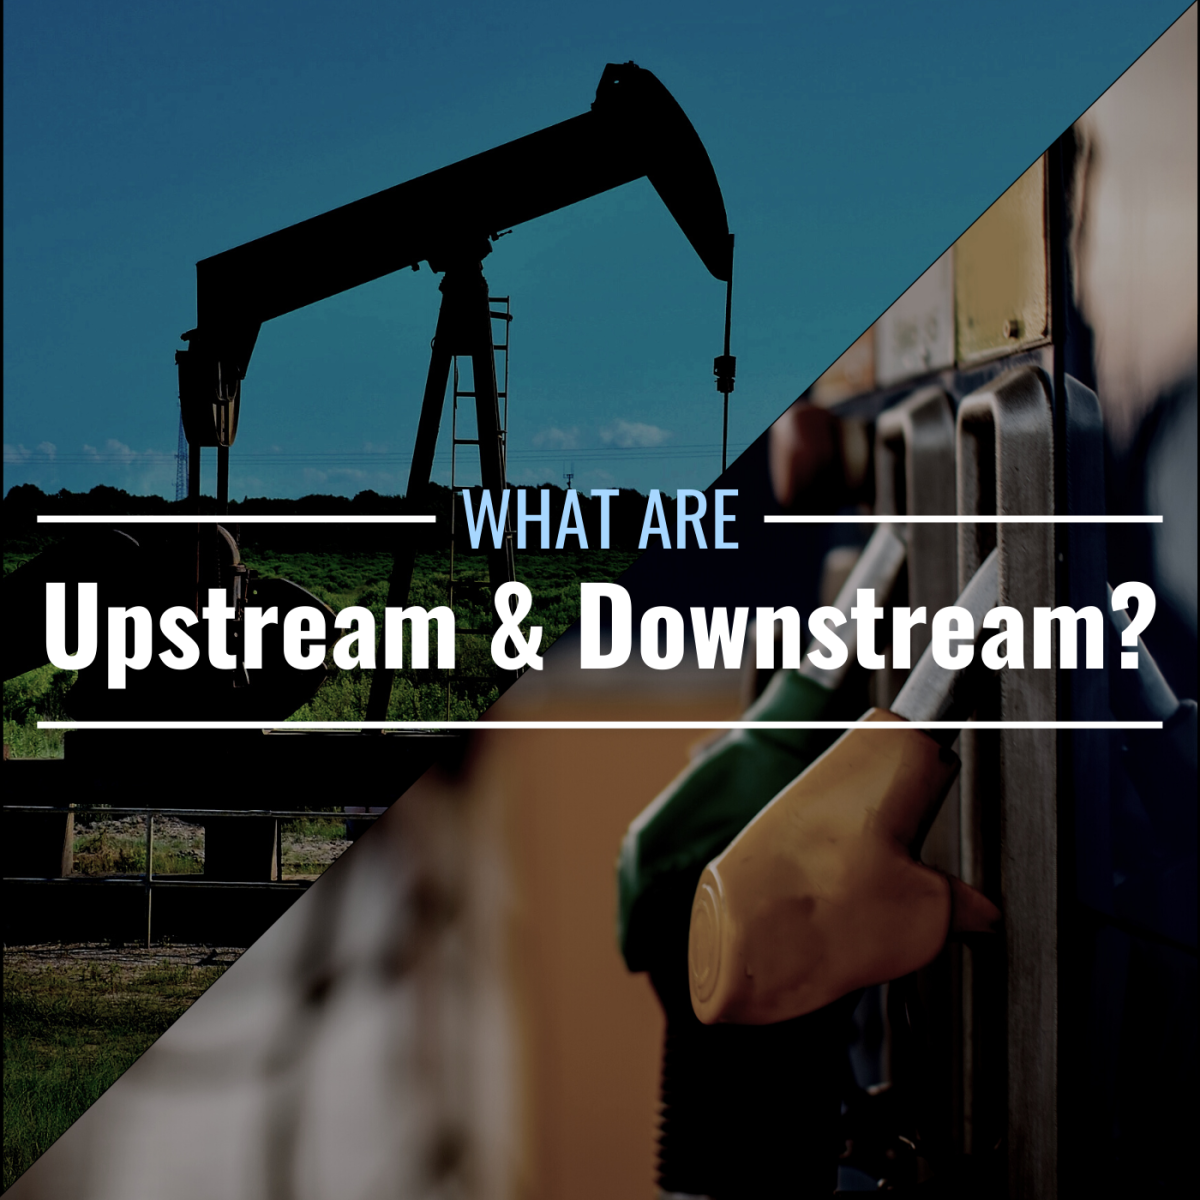 Photos of an oil well and a gasoline pump with text overlay that reads "What Are Upstream & Downstream?"